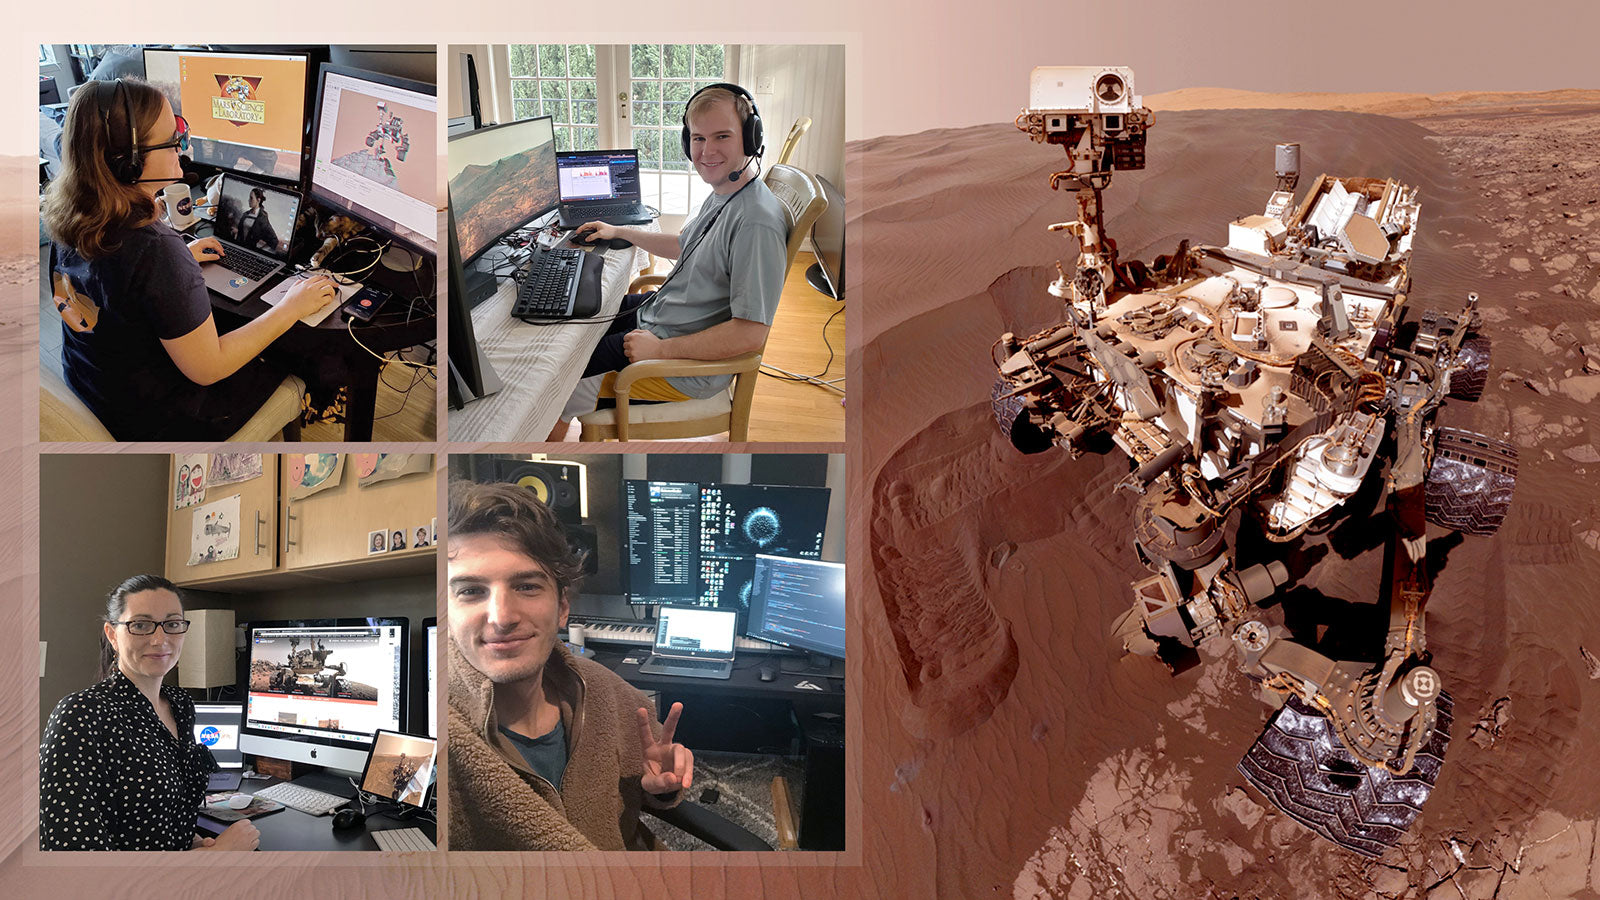 NASA scientists are controlling the Mars Curiosity rover from home amid C19 outbreak